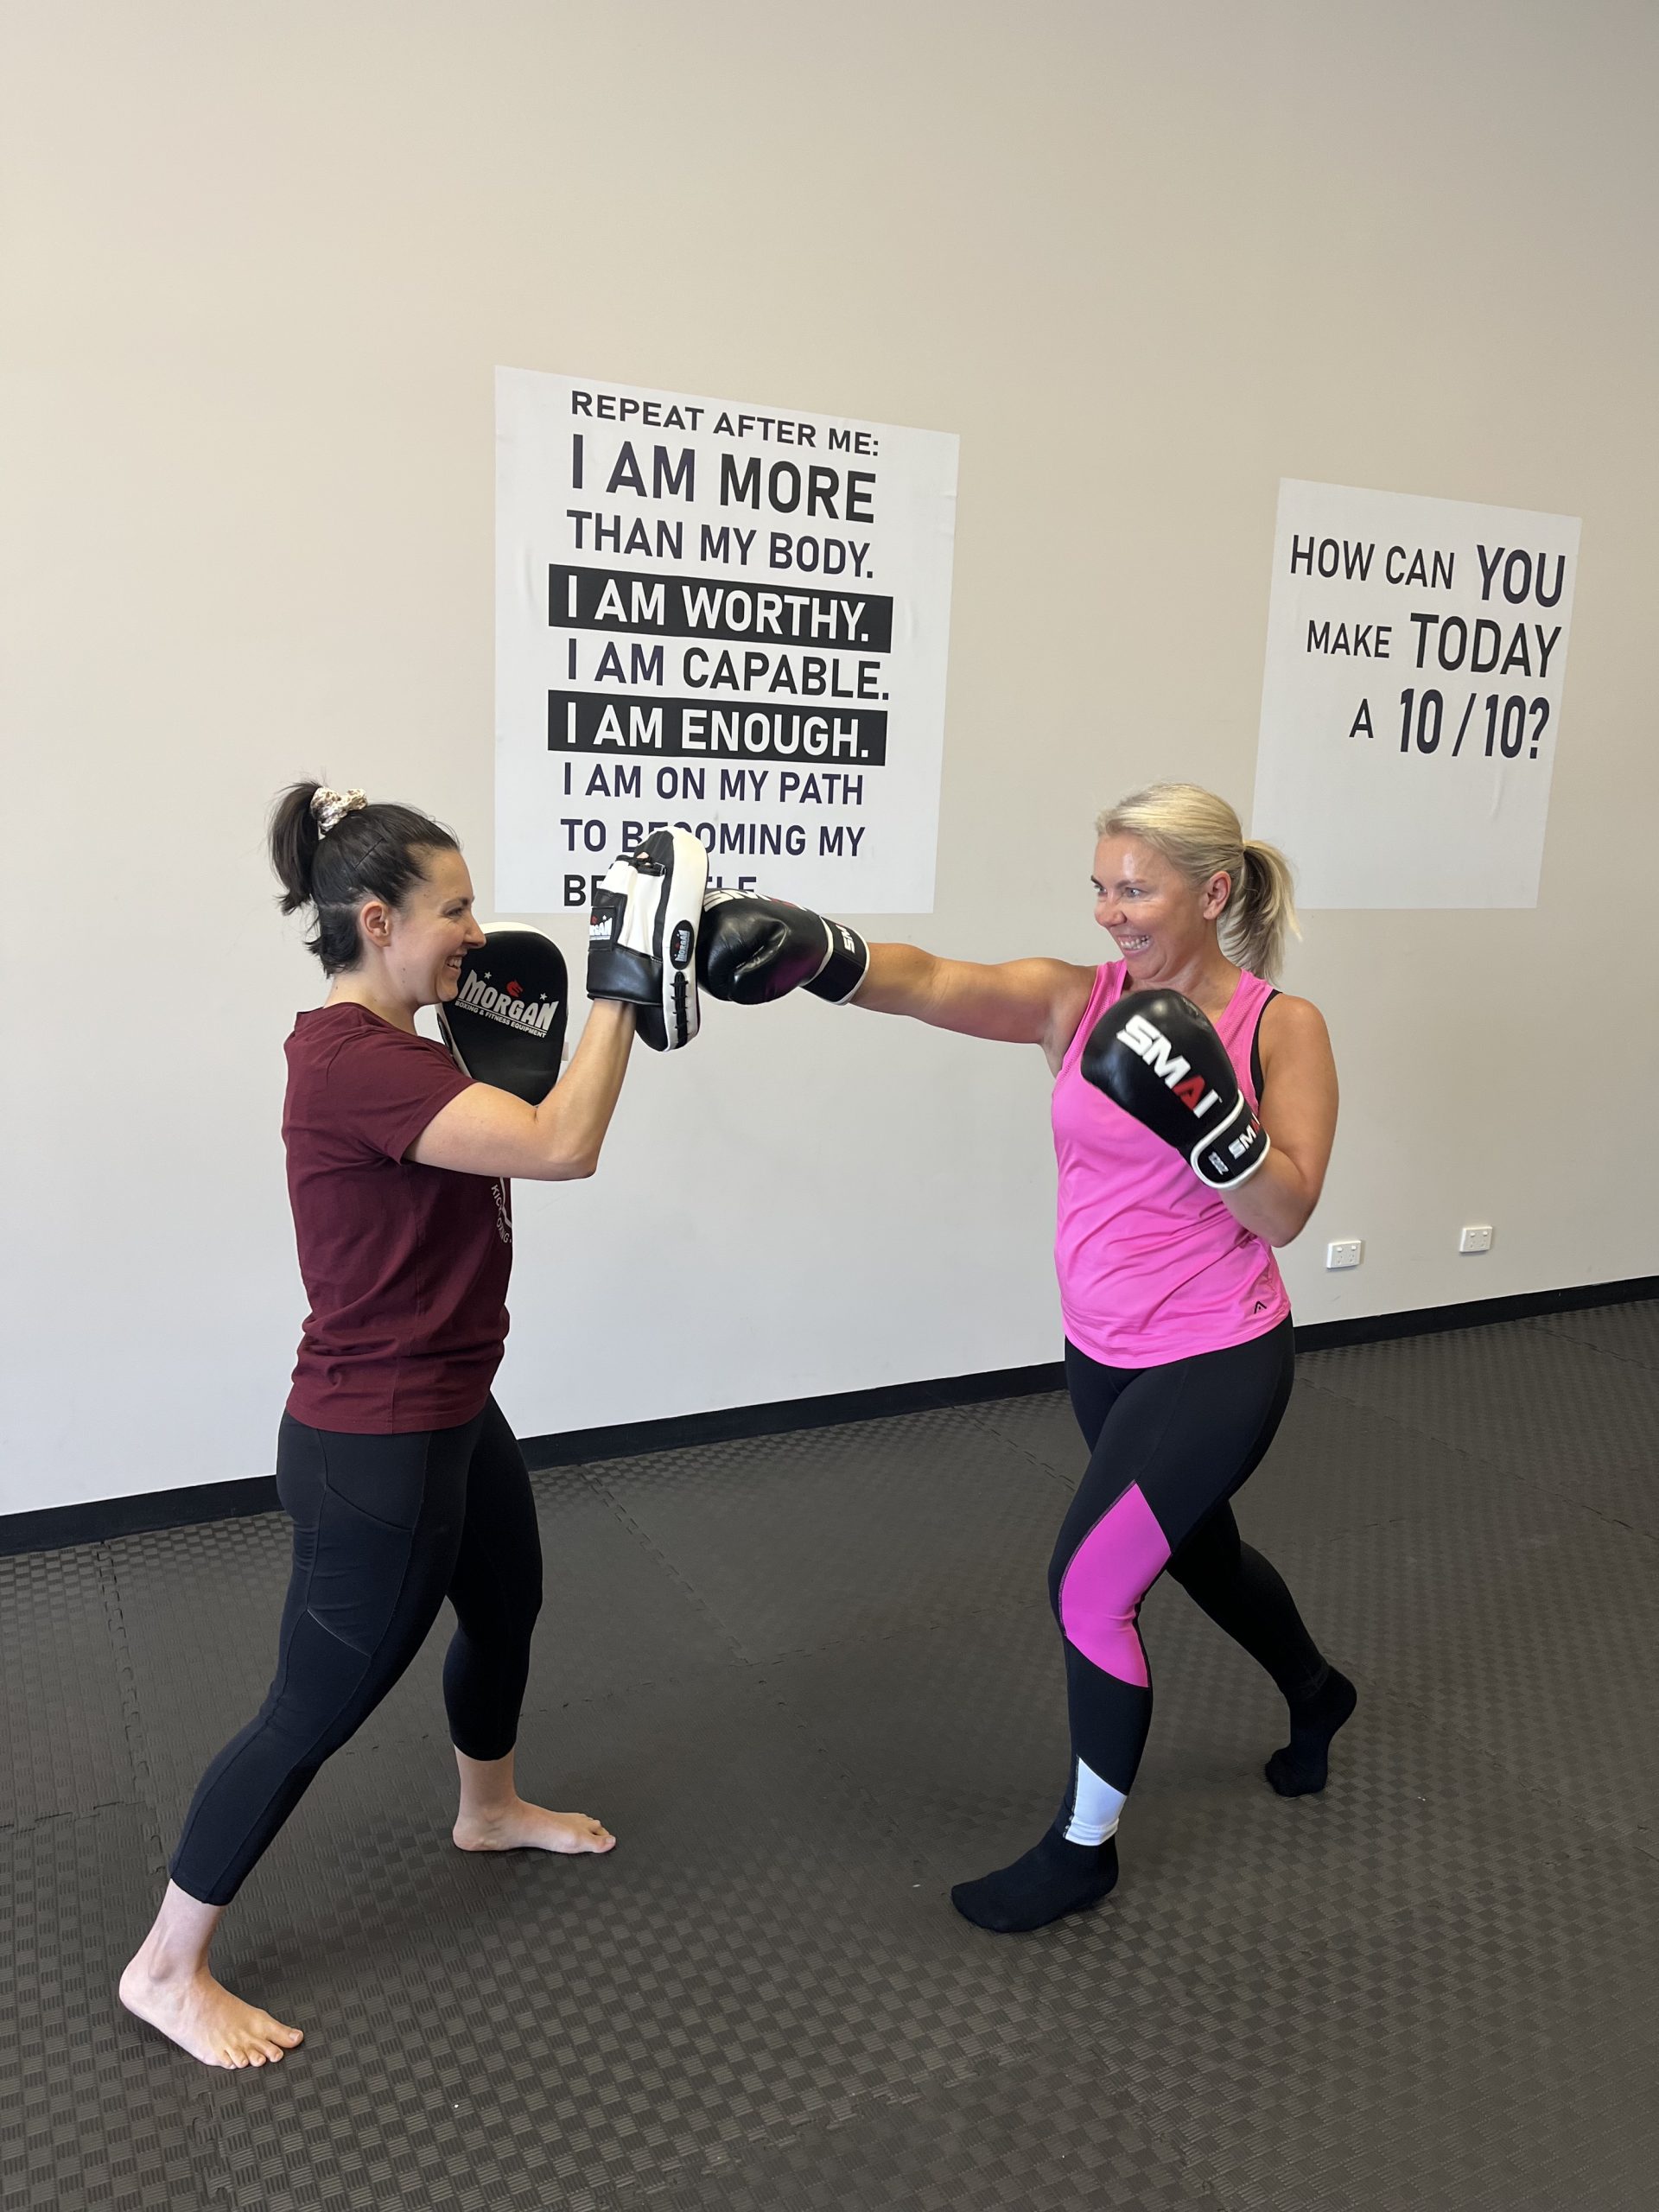 WIN a 3 Month Membership For You and A Friend To Box it Out!